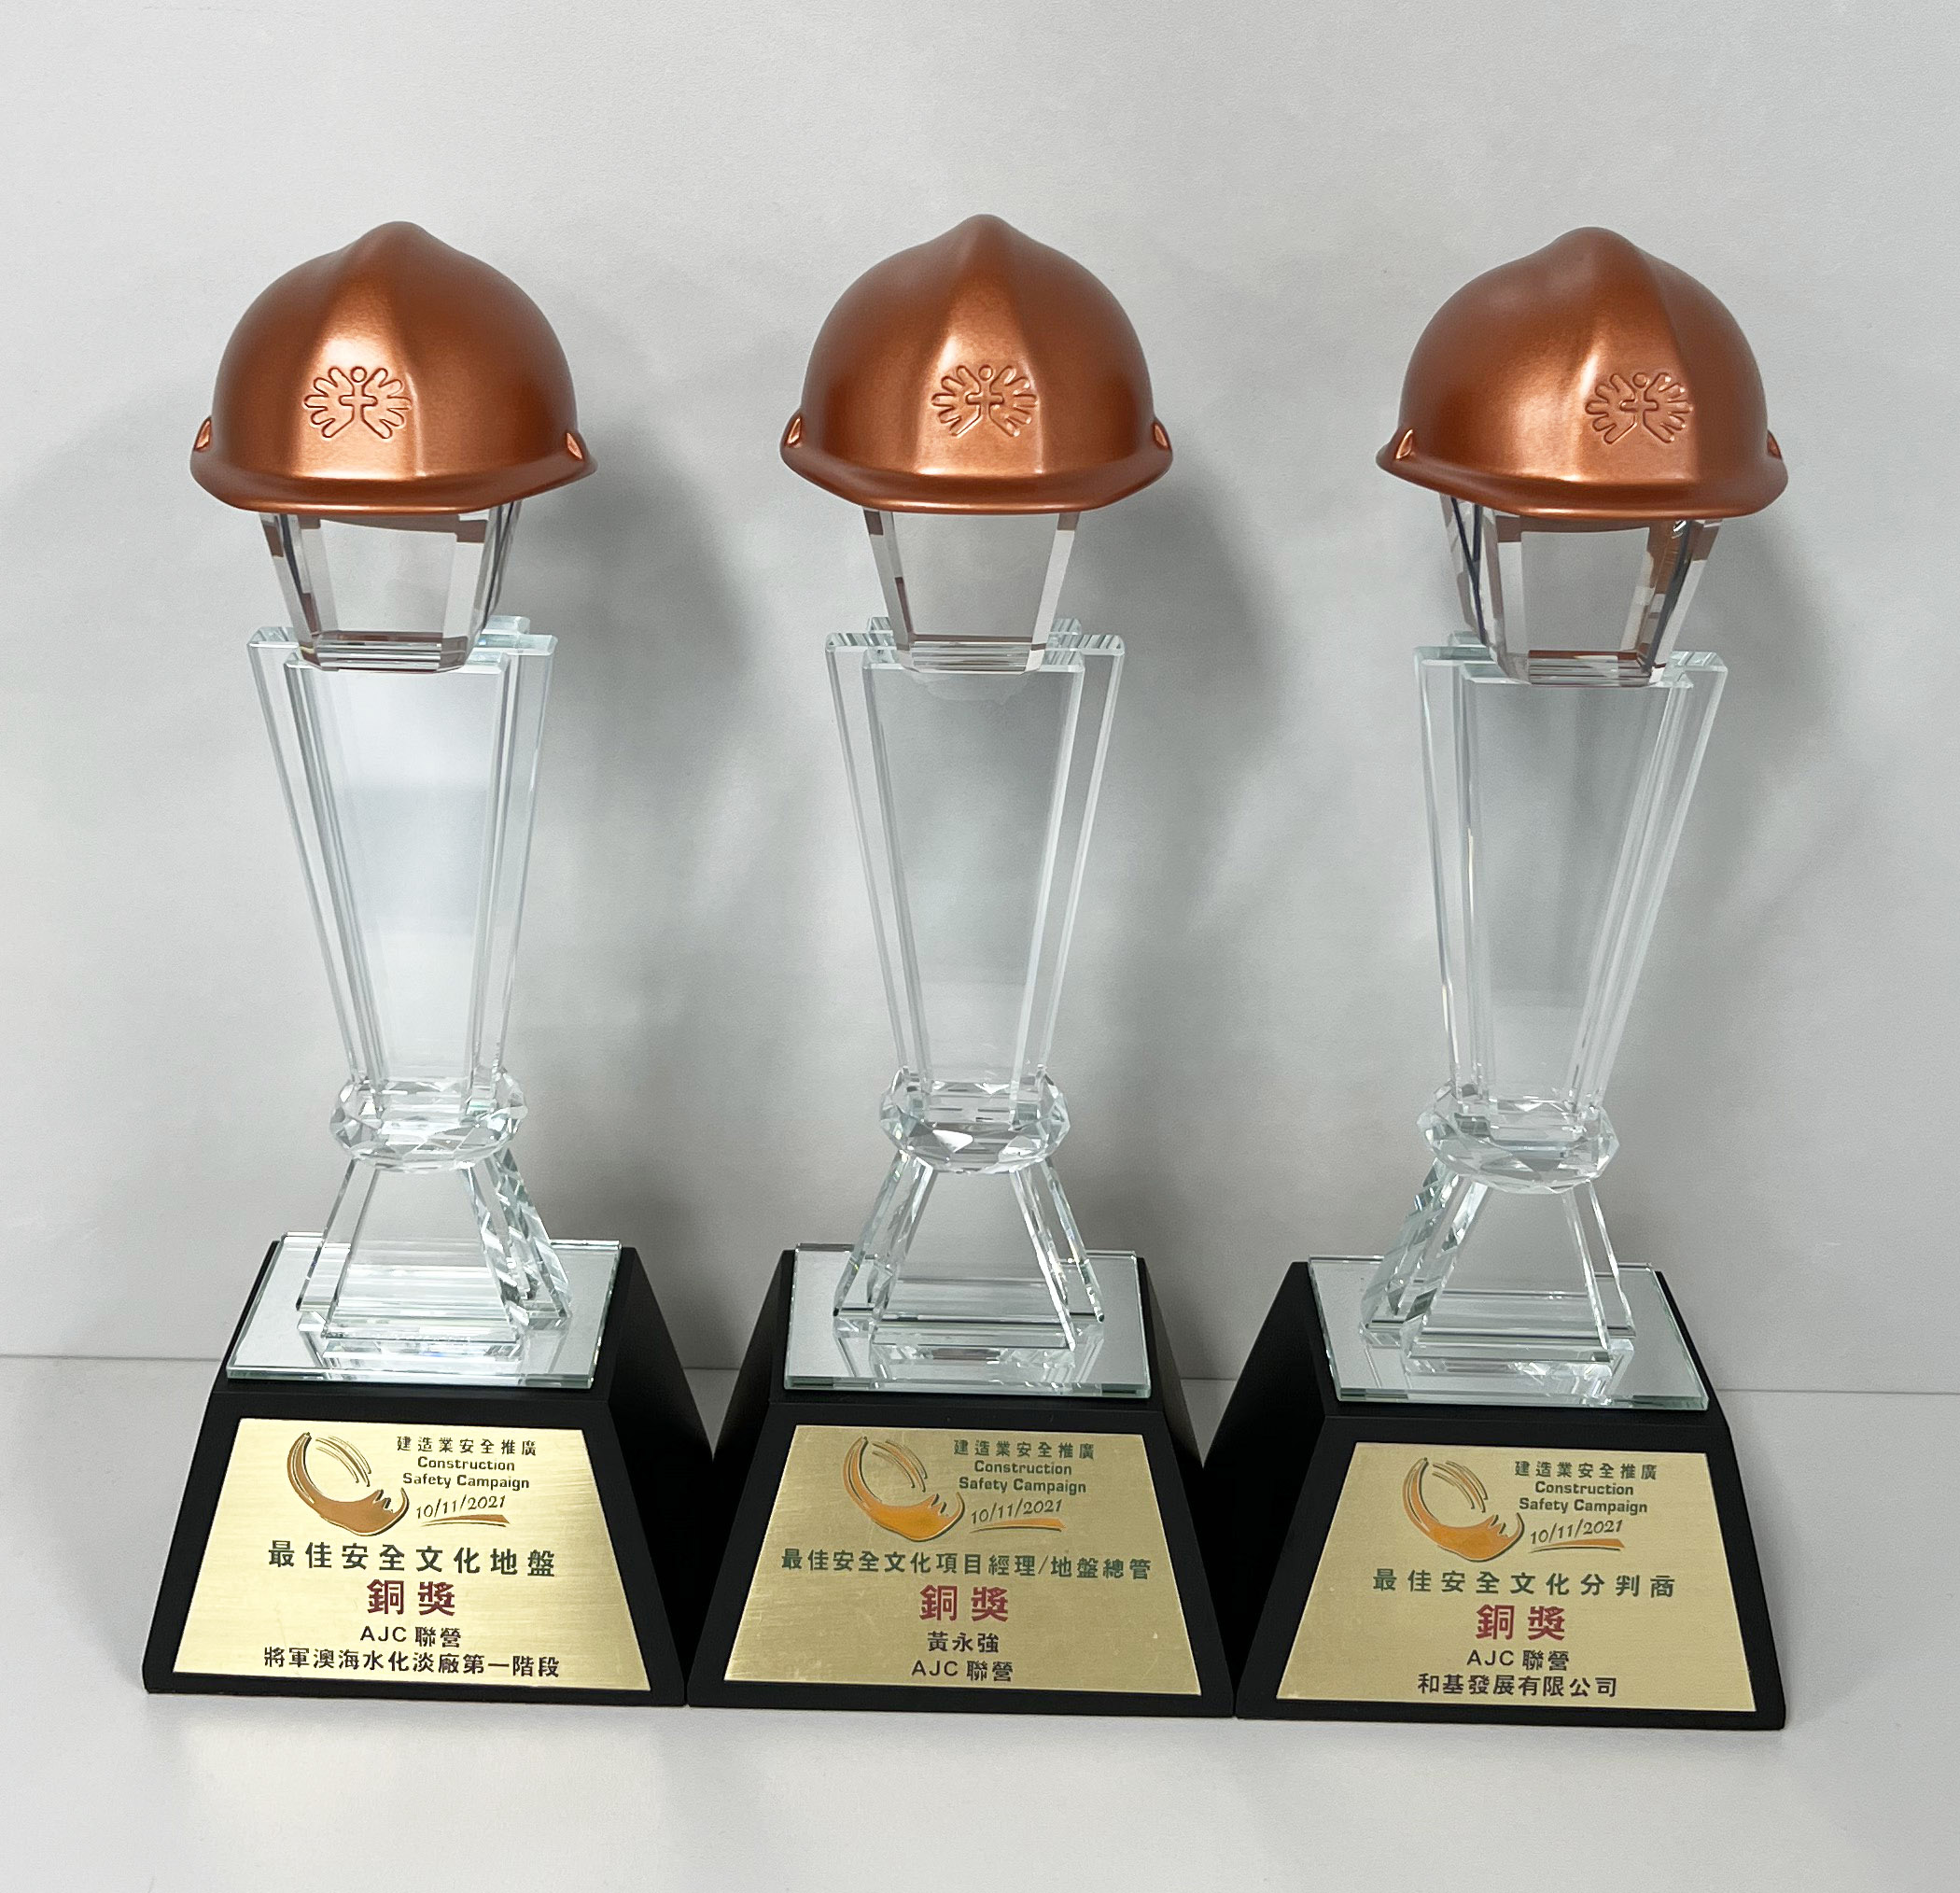 Construction Safety Campaign<br/>The 22nd Construction Safety Award